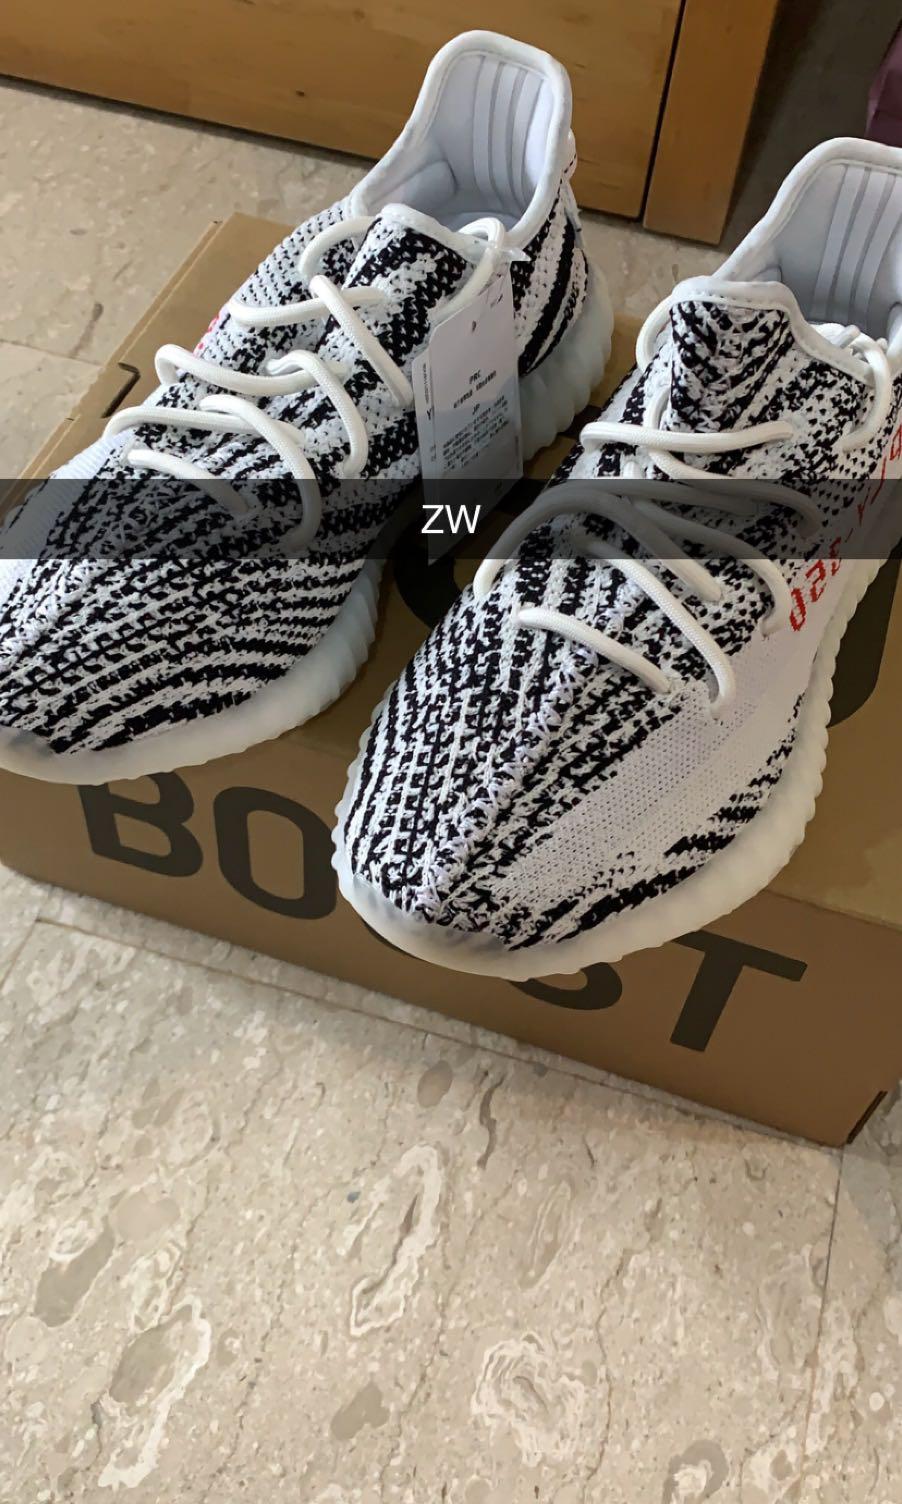 when did zebra yeezys come out